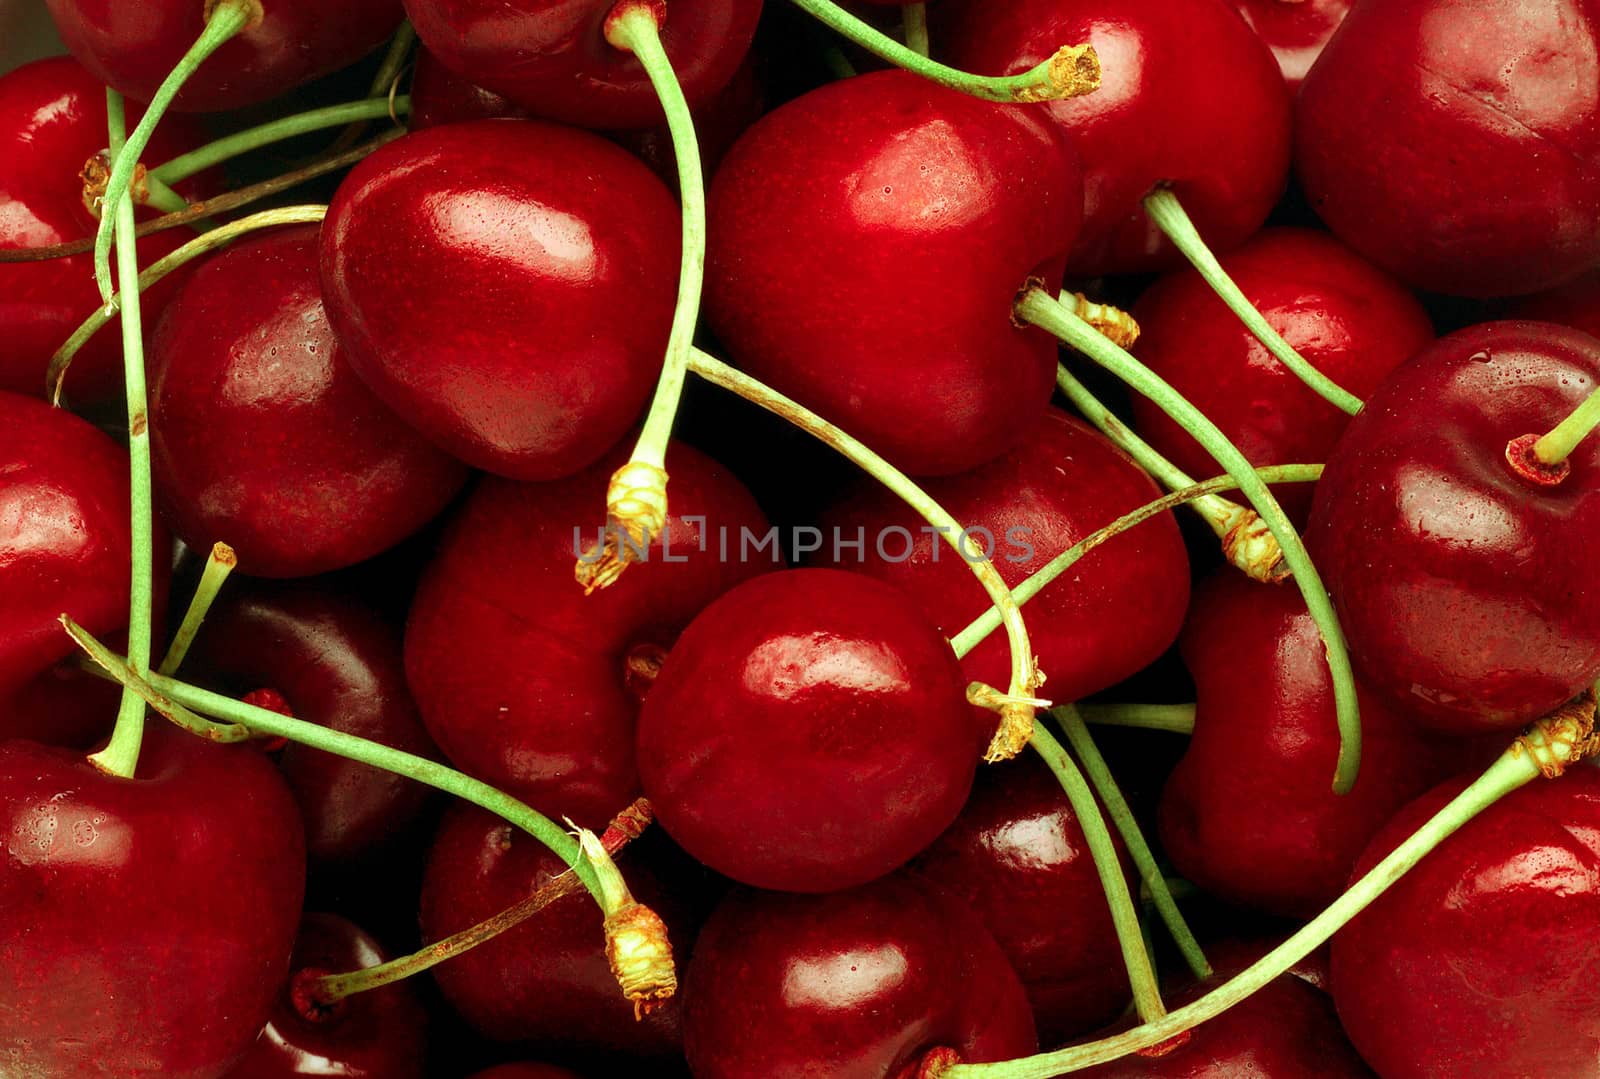 Group of Cherries forming a texture by shutswis